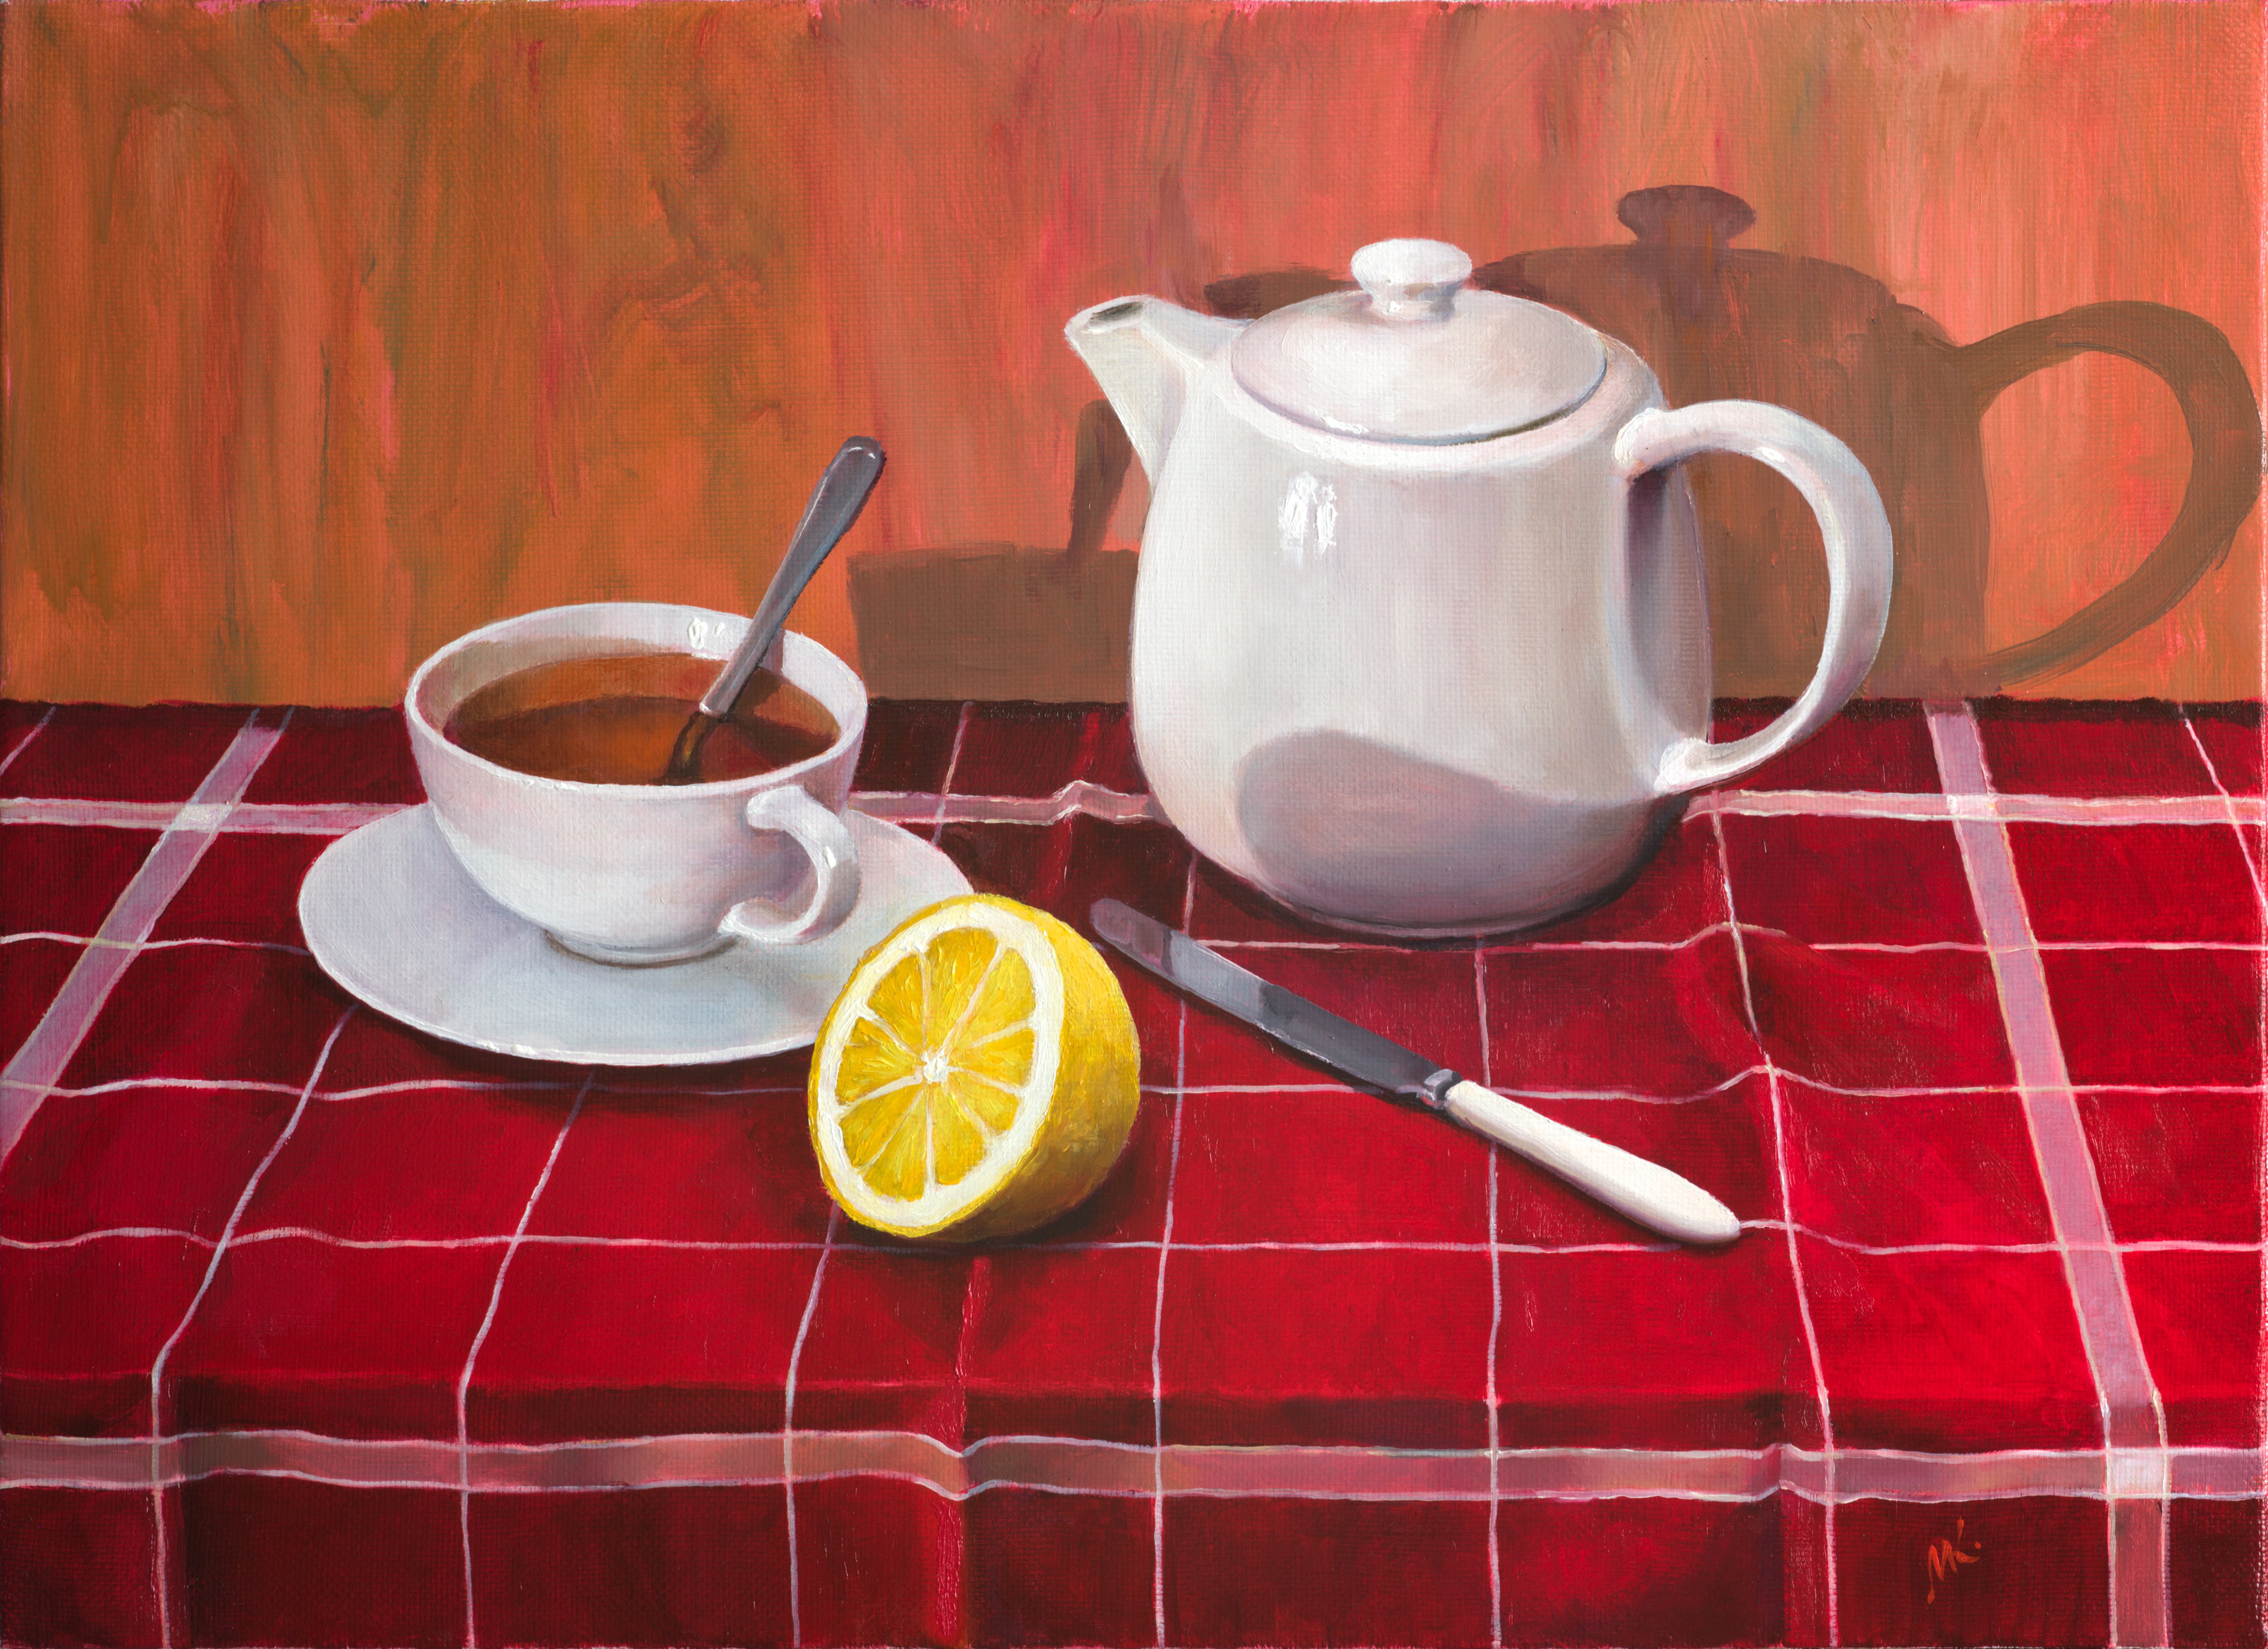 Mikhail Velavok; Tea With Lemon Comp 3, 2018, Original Painting Oil, 55 x 40 cm. Artwork description: 241 Original oil painting on stretched canvas. The artwork is being sold unframed. The frame in the additional photo is an example only.tea, lemon, teapot, cup, knife, still life, red, checkered, fold, original...